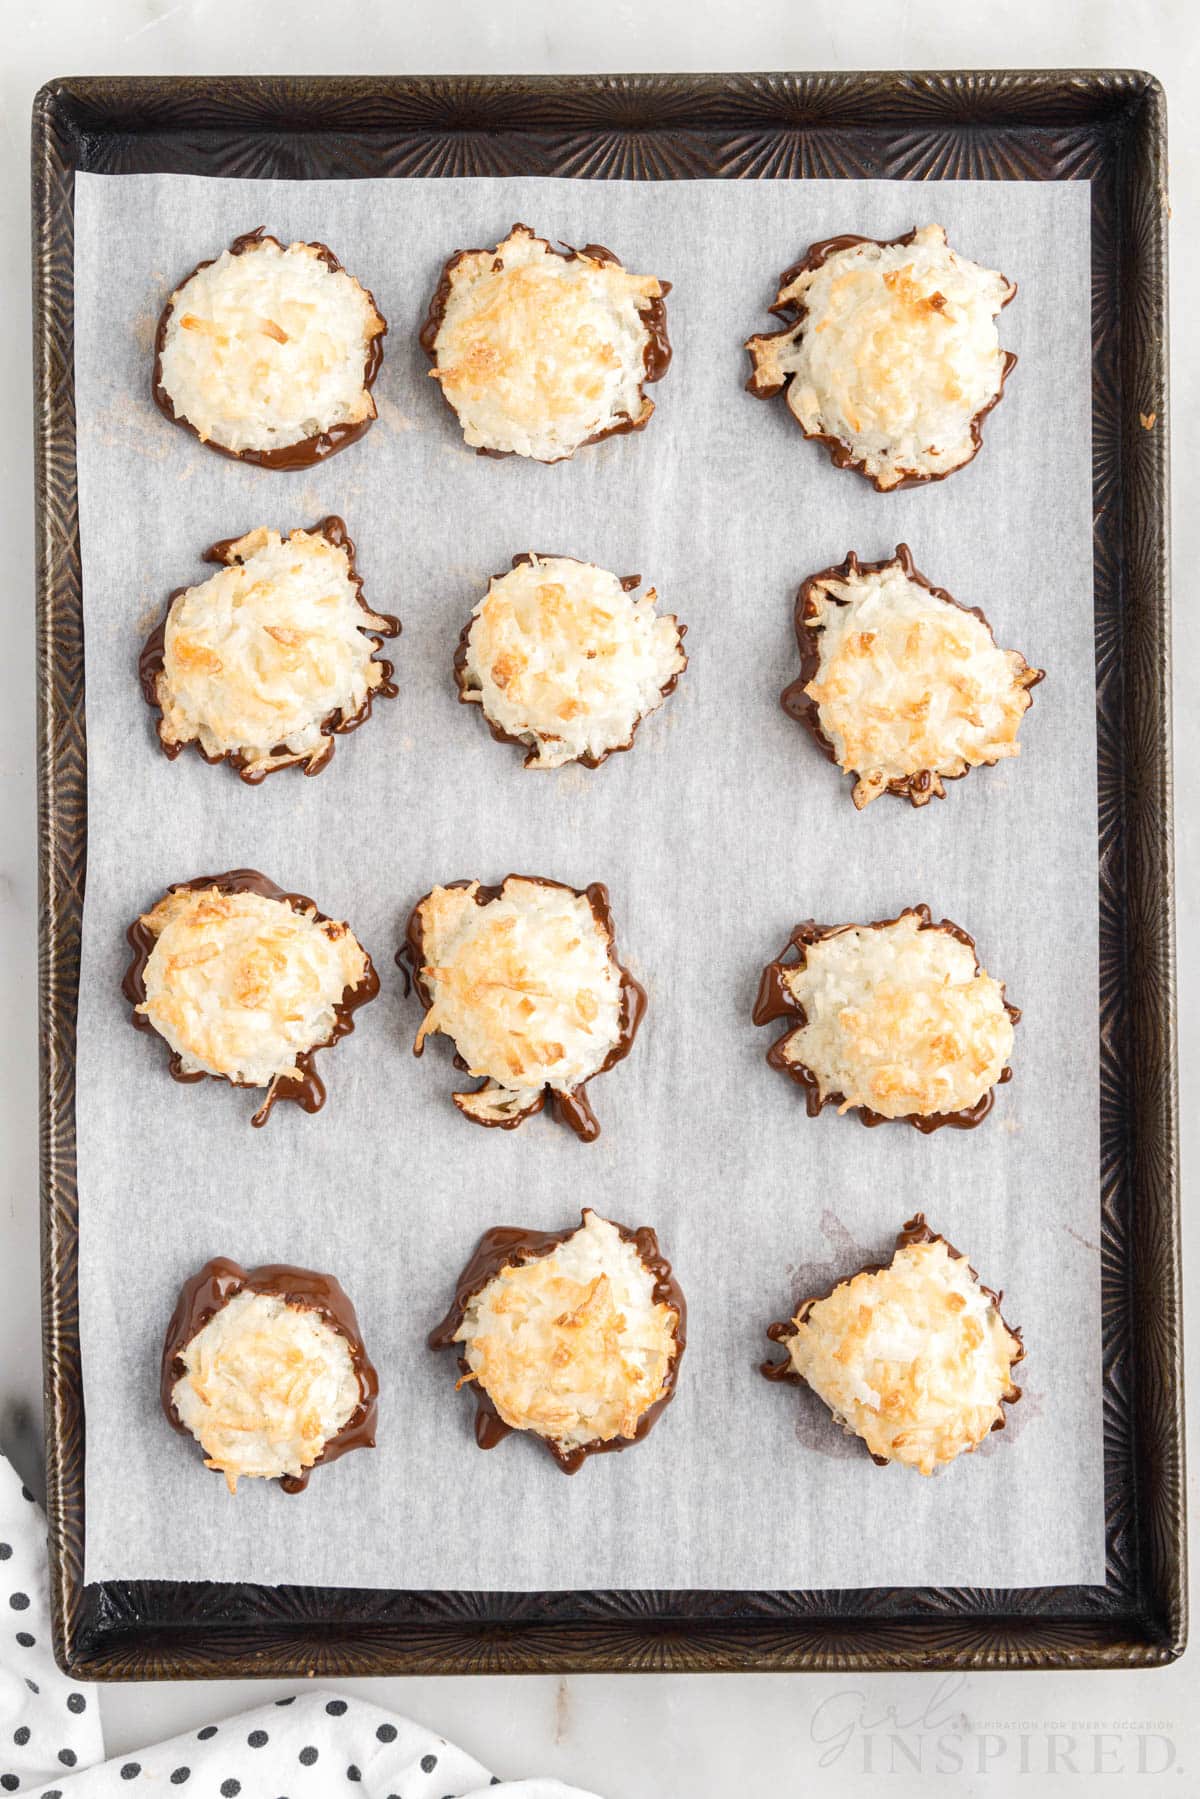 finished coconut macaroons on parchment paper lined cookie sheet